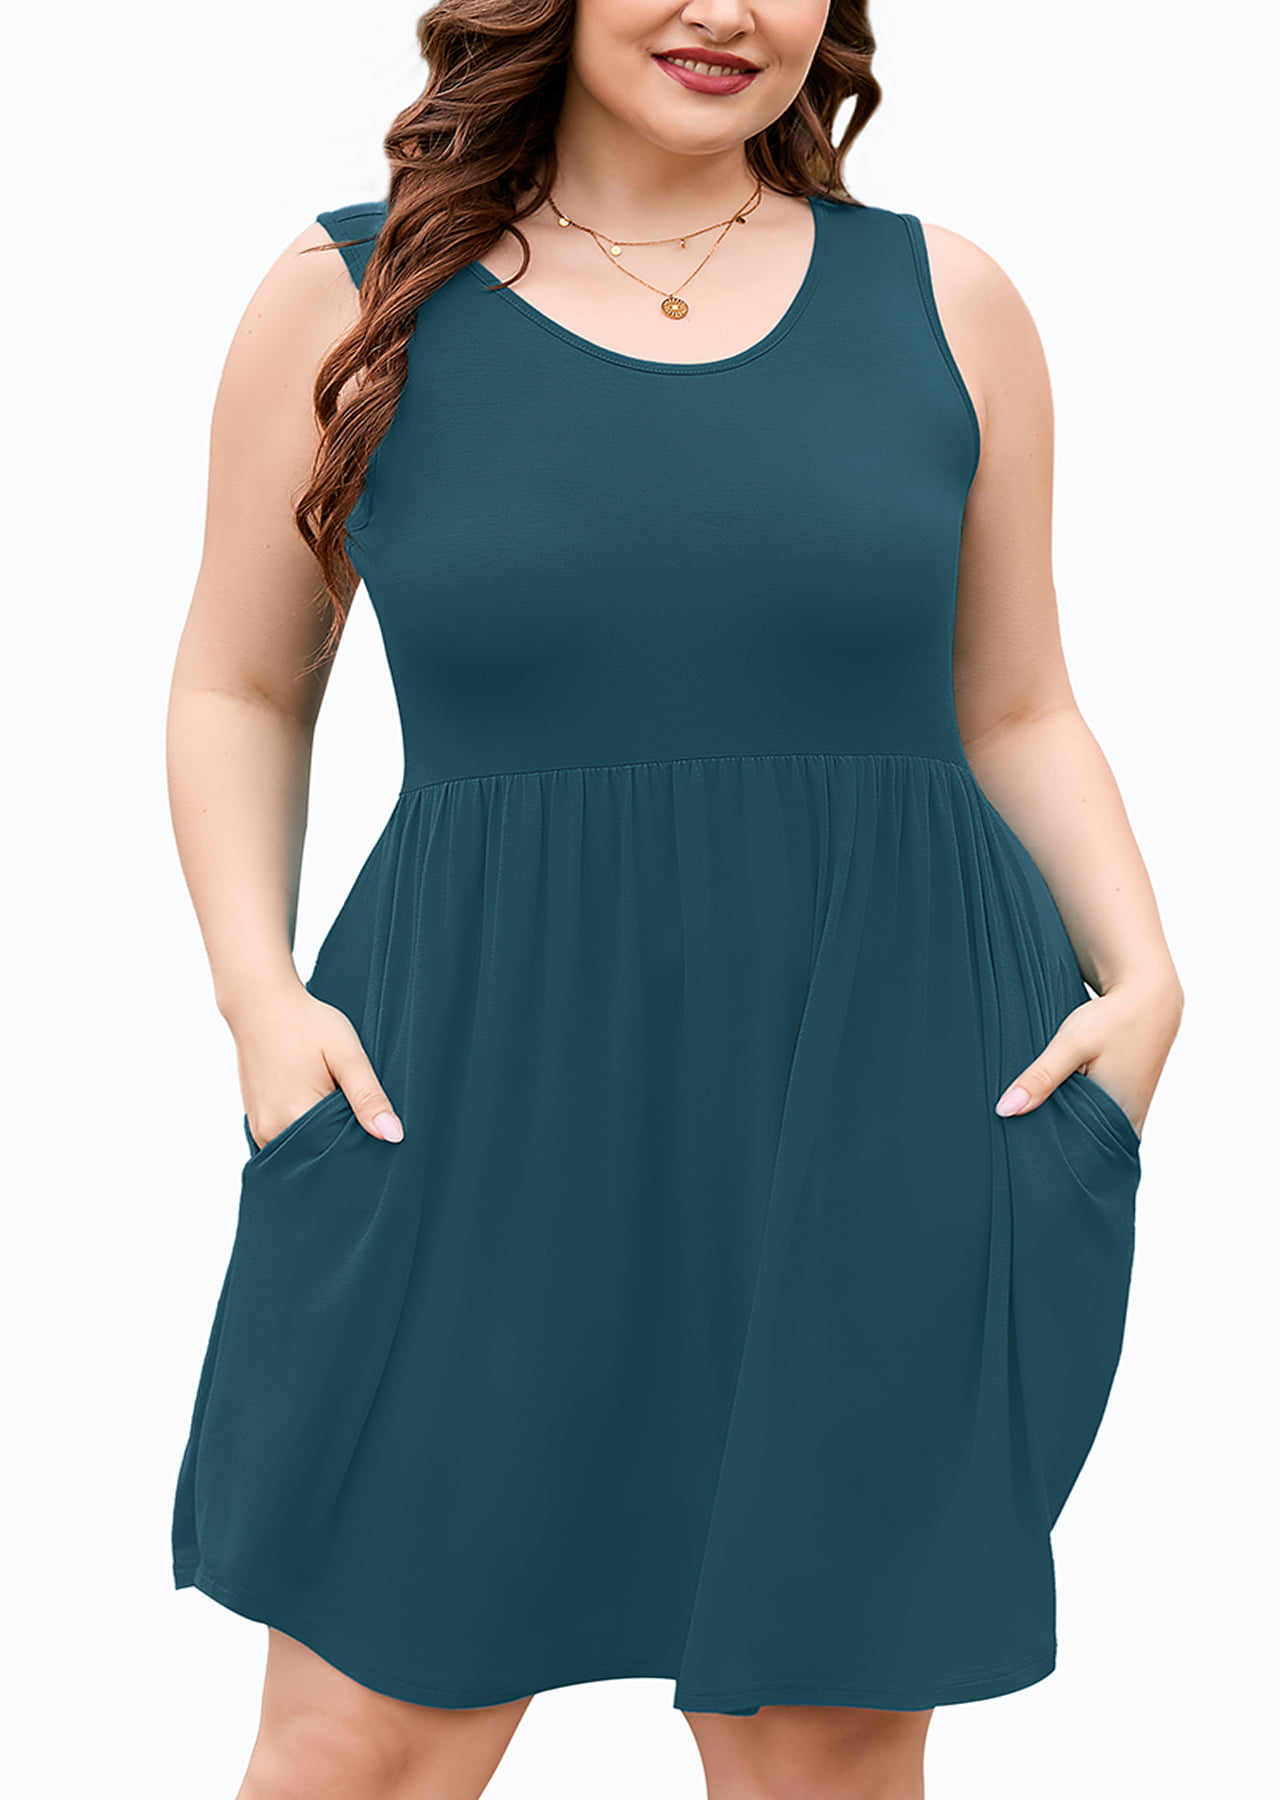 SHOWMALL Plus Size Summer Dress for Women Lake Blue 3X Casual ...